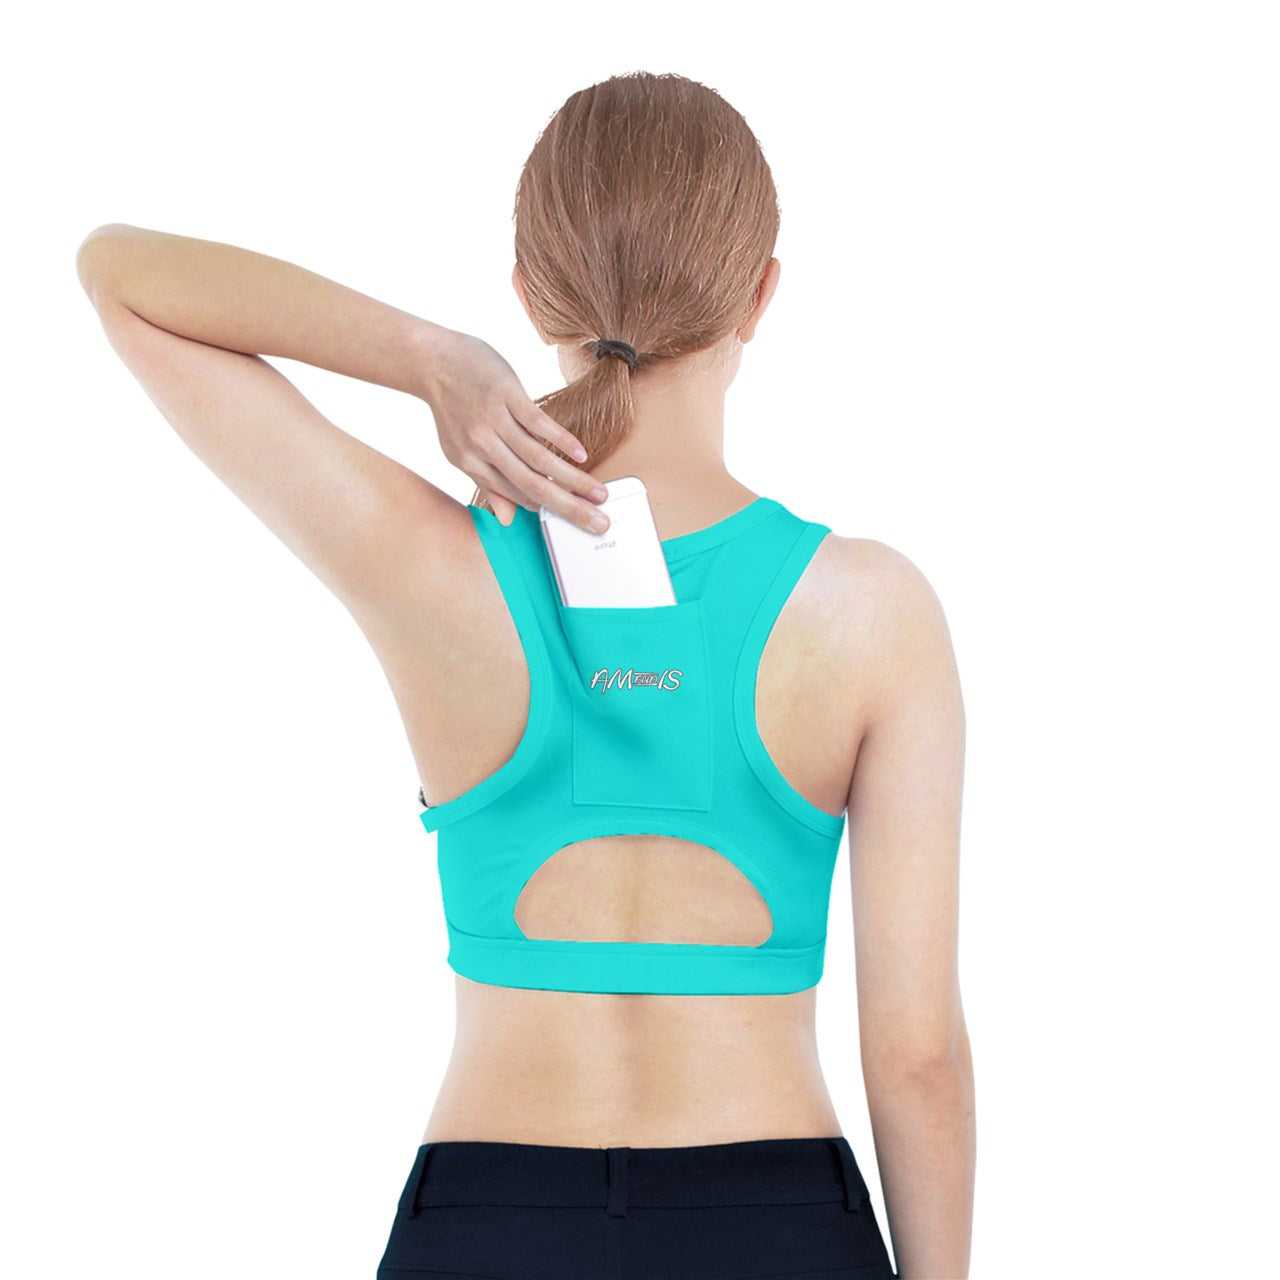 TURQUOISE Am&Is Activewear Sports Bra With Pocket - 6 colors - women's sports bra at TFC&H Co.